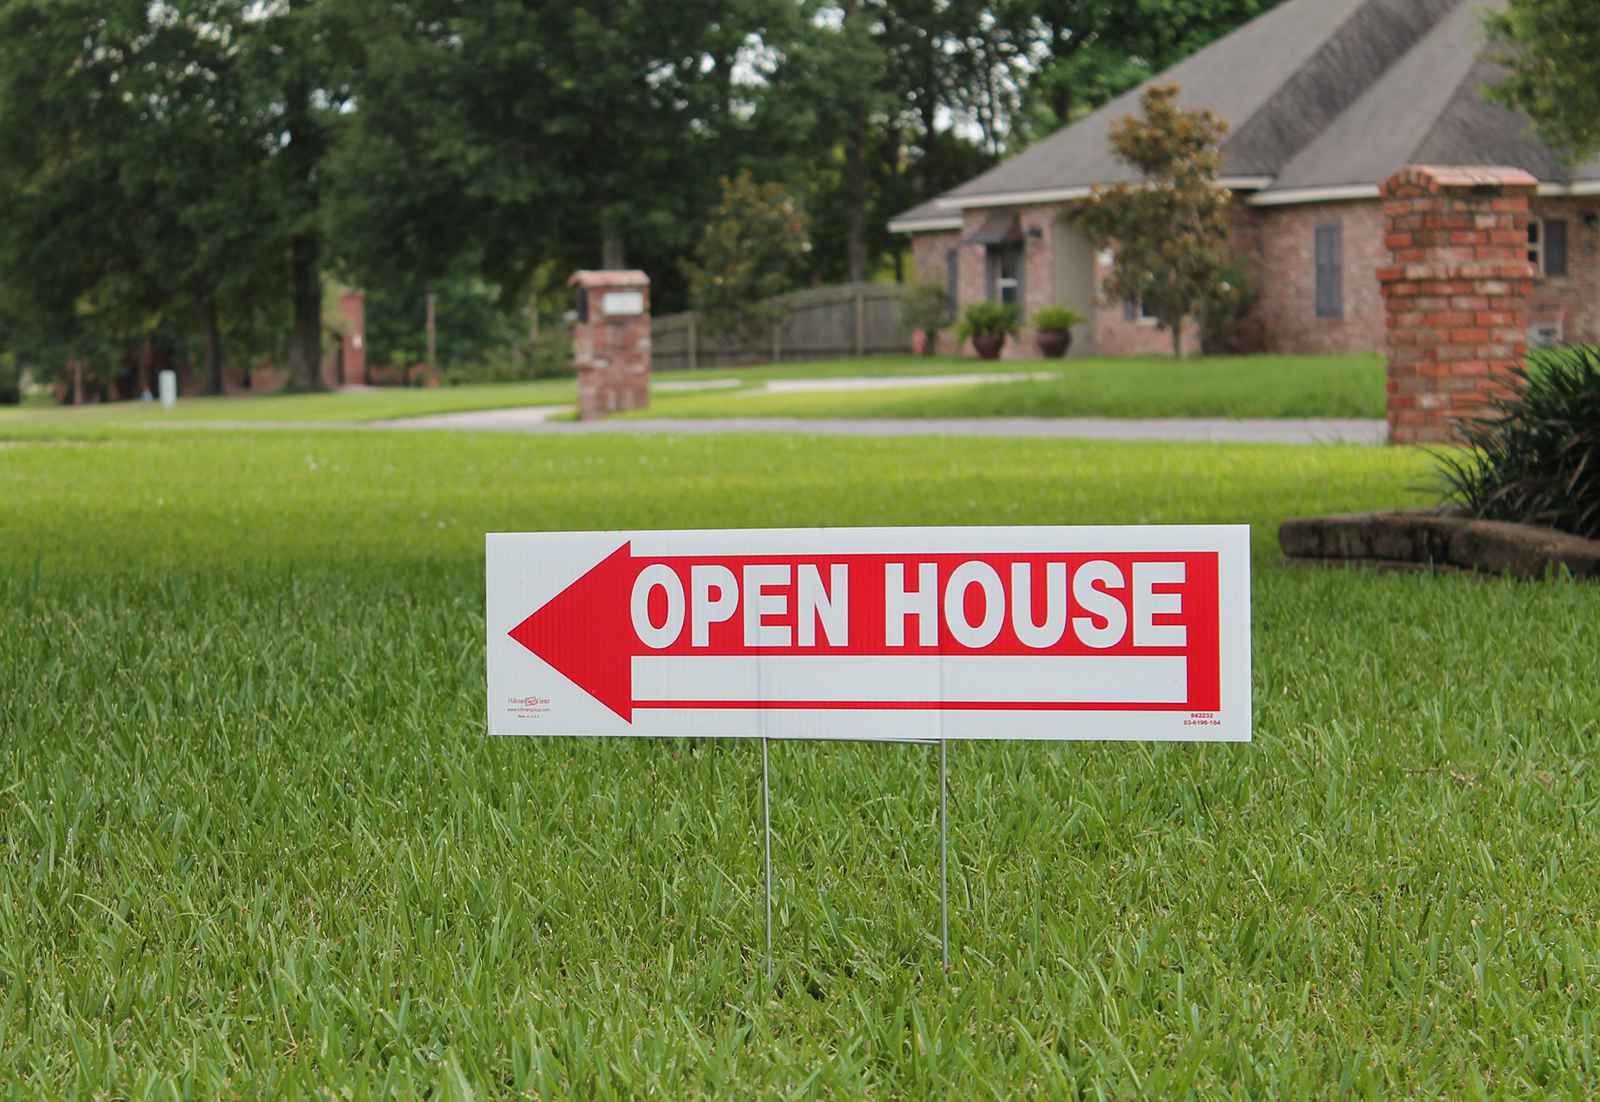 Open house sign for real estate